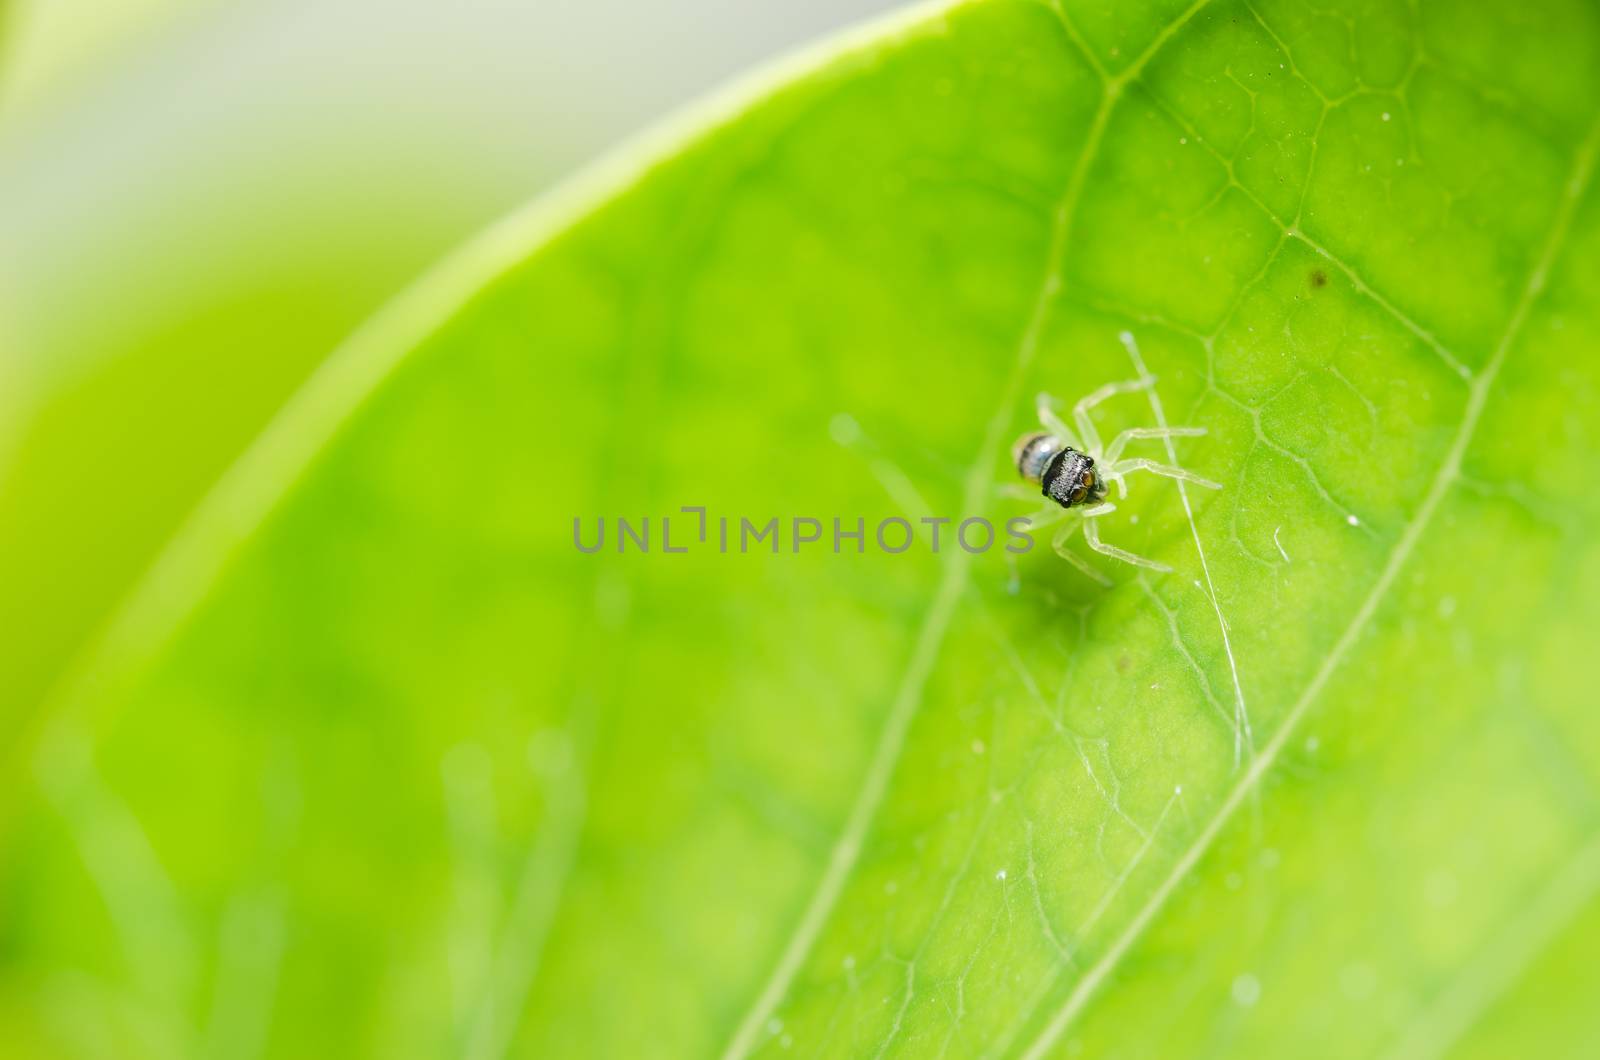 Spider in the nature green background macro shot